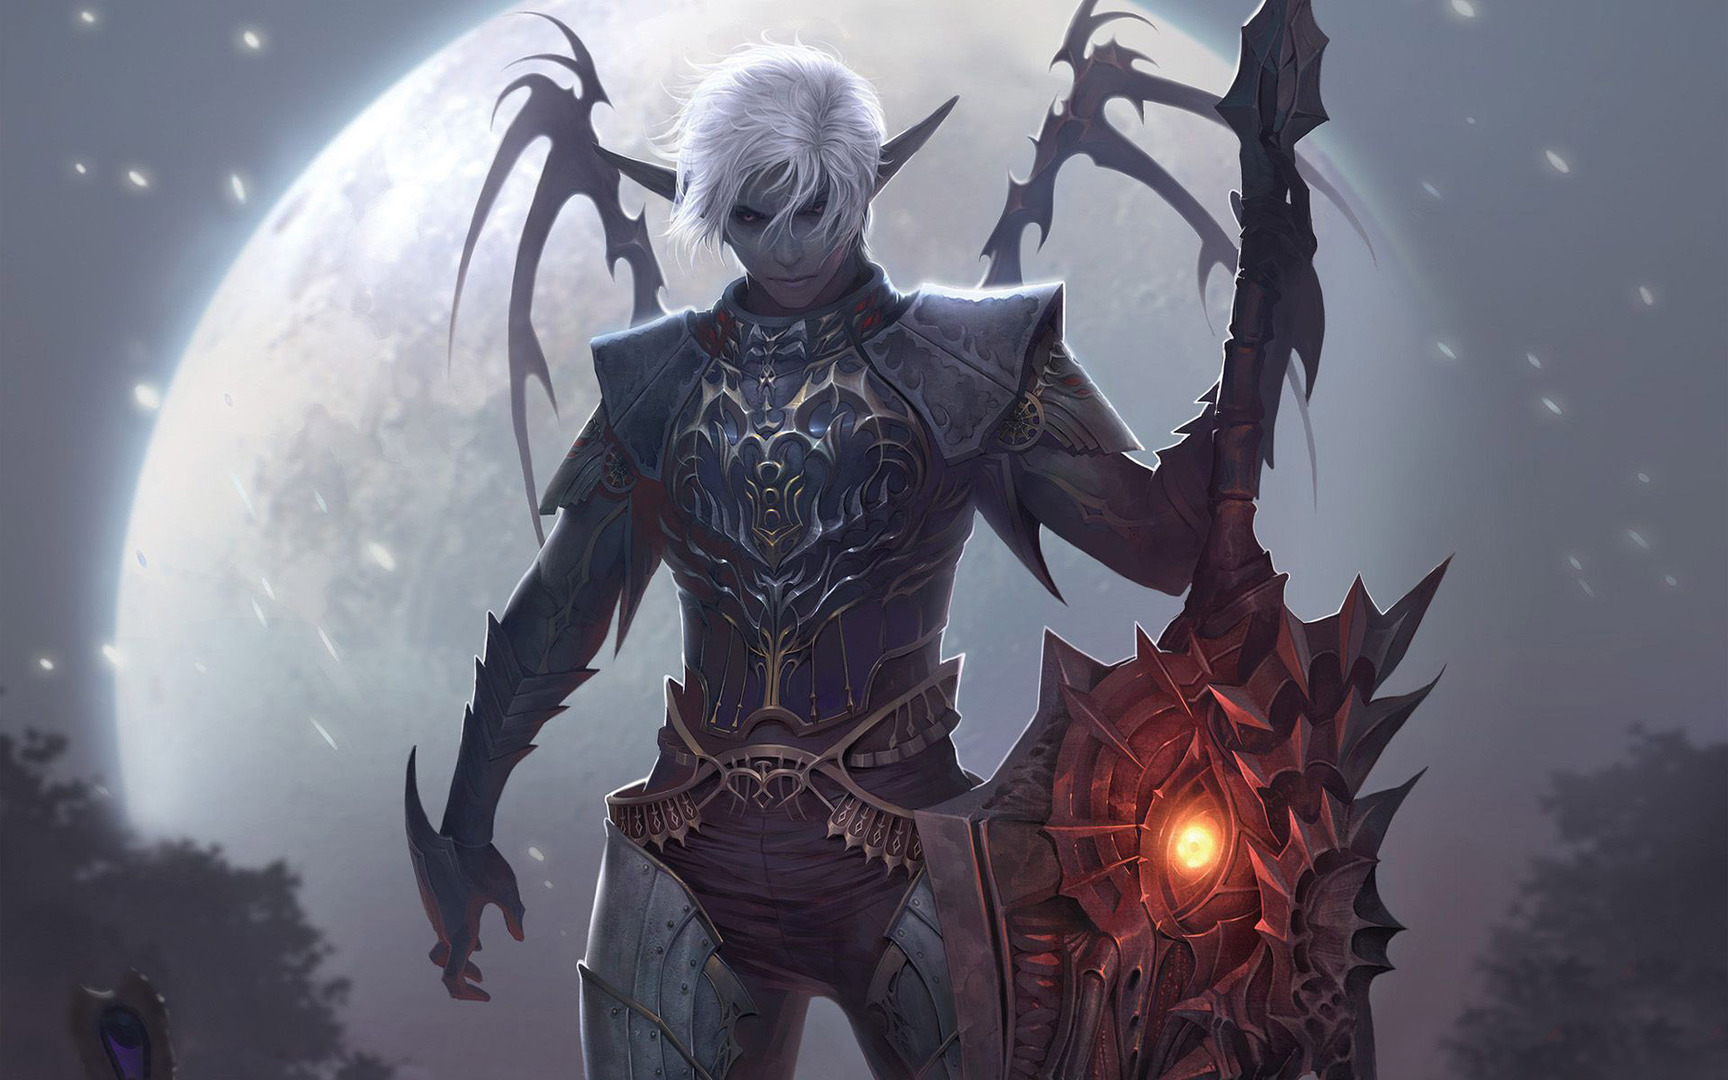 Download Lineage II   The Chaotic Chronicle wallpaper